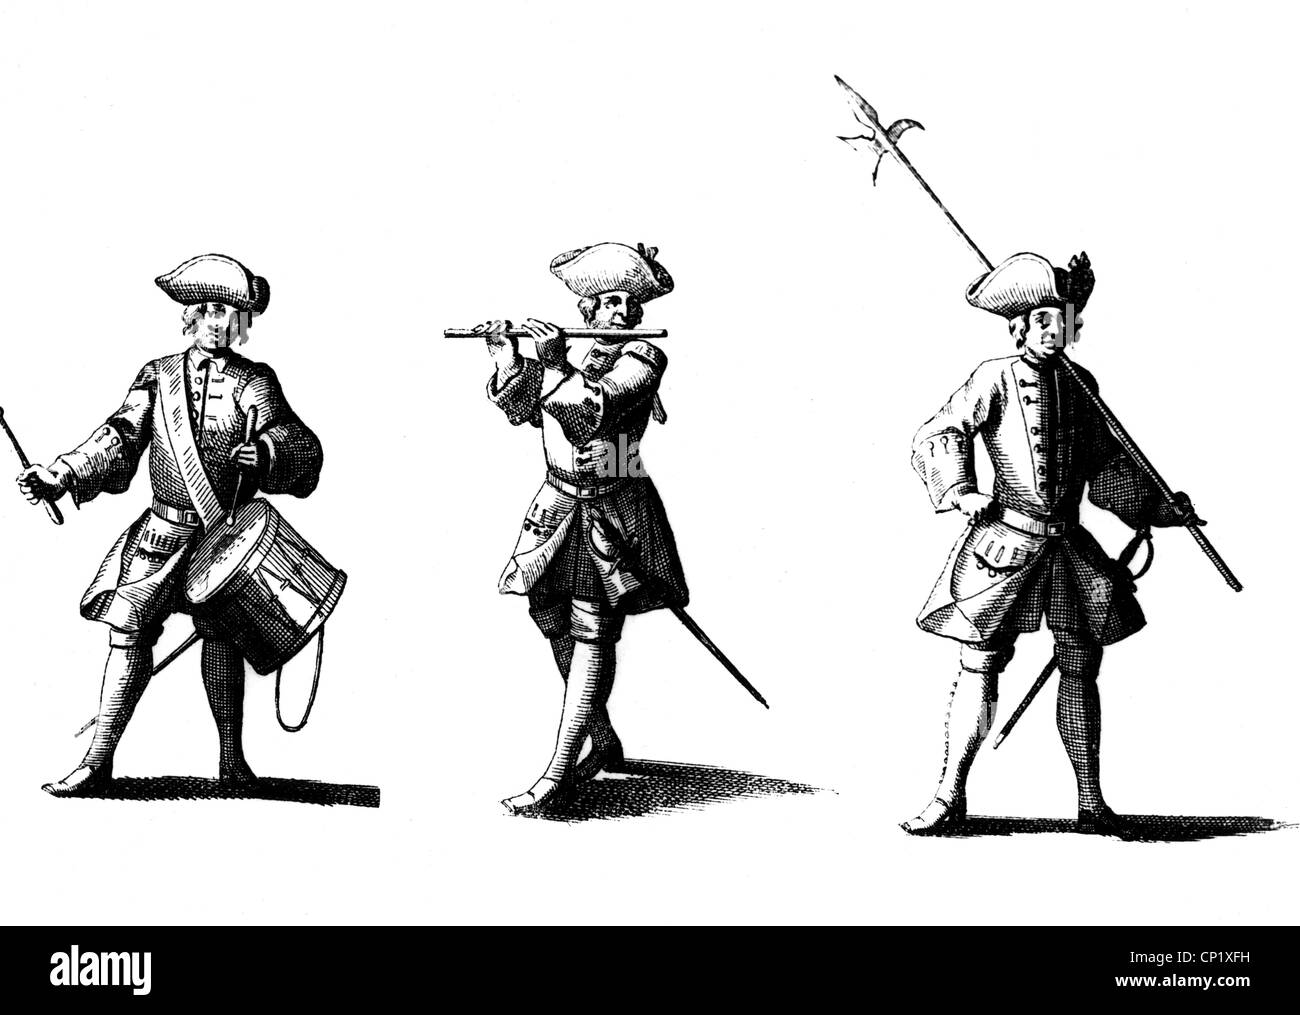 military, Germany, drummer, flute player and soldier with halberd, early 18th century, illustration from 'Der vollkommene teutsche Soldat', by Johann Friedrich von Flemming, Leipzig, 1726, Electoral Saxony, Electorate of Saxony, infantry, infantryman, infantrymen, soldiers, soldier, uniform, uniforms, Holy Roman Empire of the German Nation, Saxon, German, Germans, sabre, sabres, pipe, pipes, flutist, flutists, transverse flute, transverse flutes, tambour, drum, drums, military music, musician, musicians, , Additional-Rights-Clearences-Not Available Stock Photo